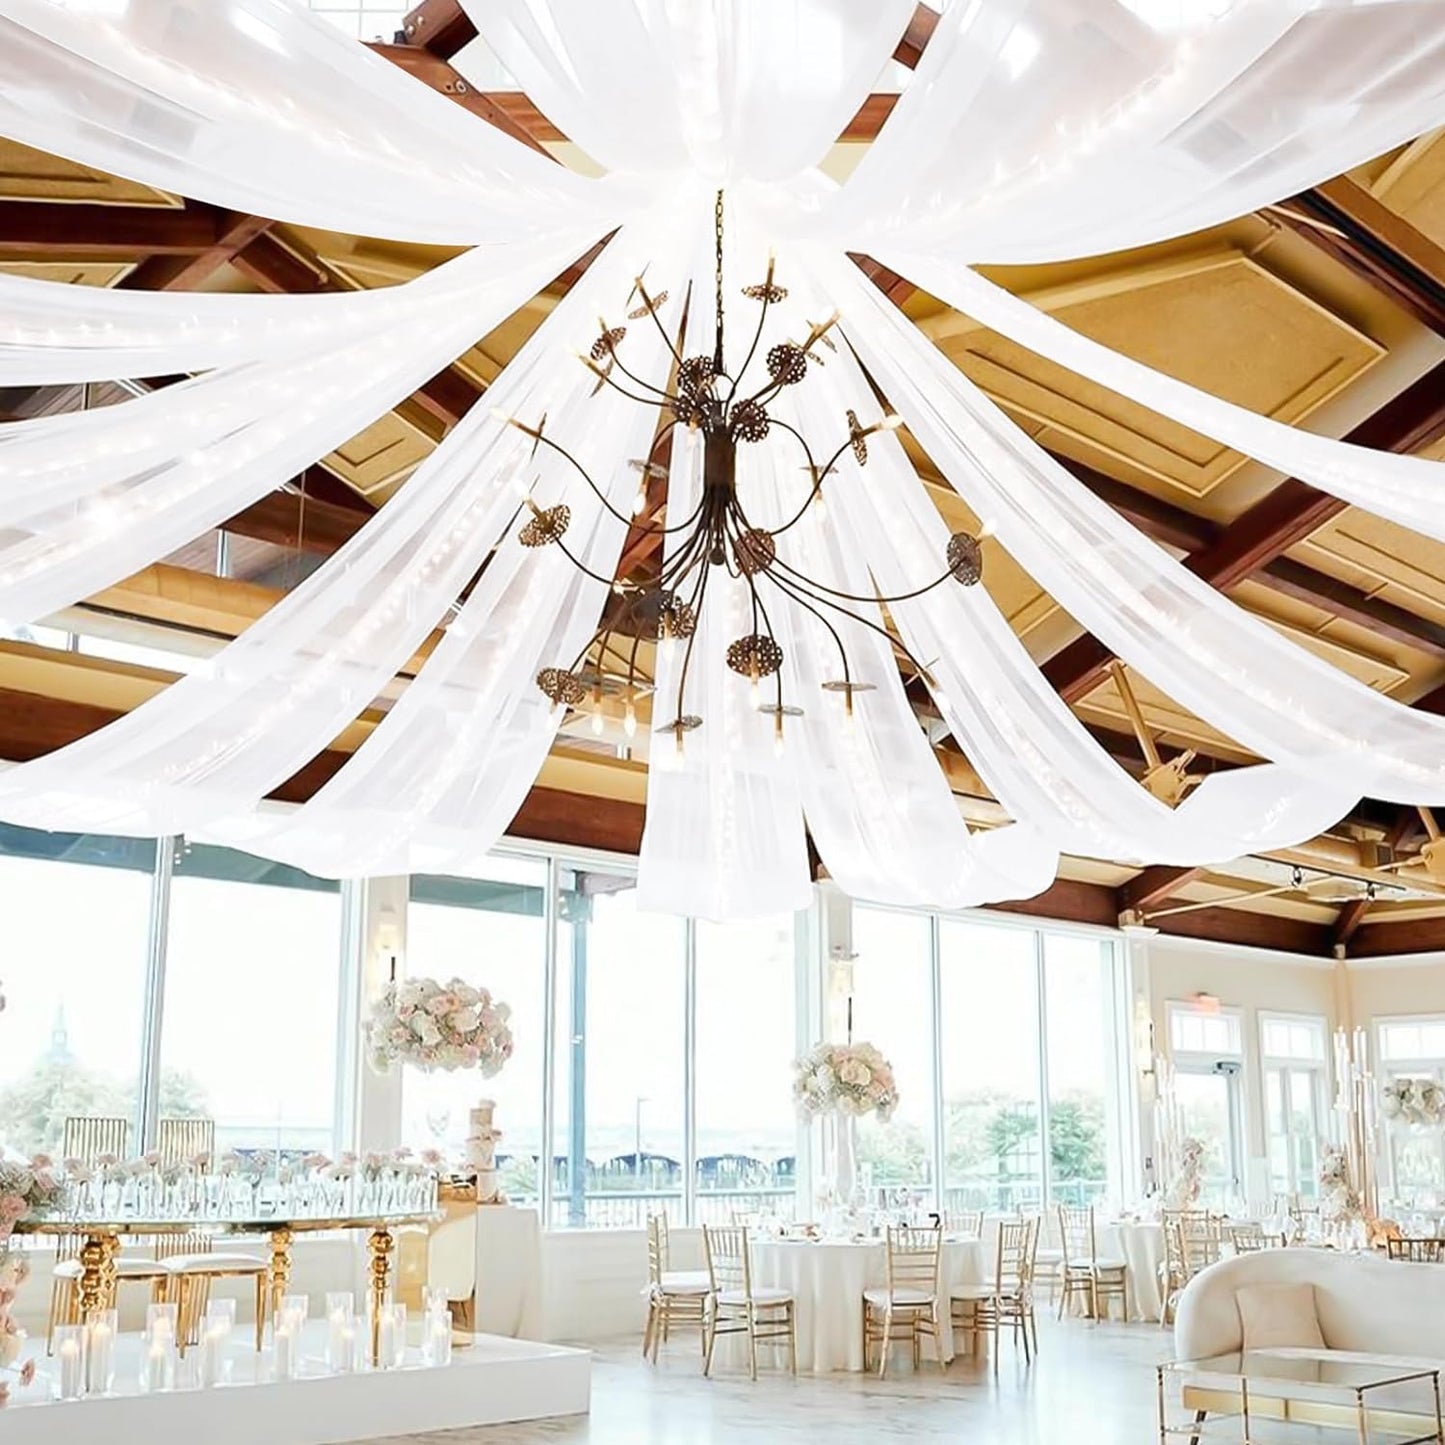 6 Panels White Ceiling Drapes for Wedding Ceiling Drapes 5Ftx20Ft Wedding Arch Draping Fabric Sheer Curtains Voile Chiffon Drapery Draping Wedding Ceiling Decorations for Party Ceremony Stage Swag  Showgeous White 2 Panel-5Ftx10Ft(60"Wx120"L) 